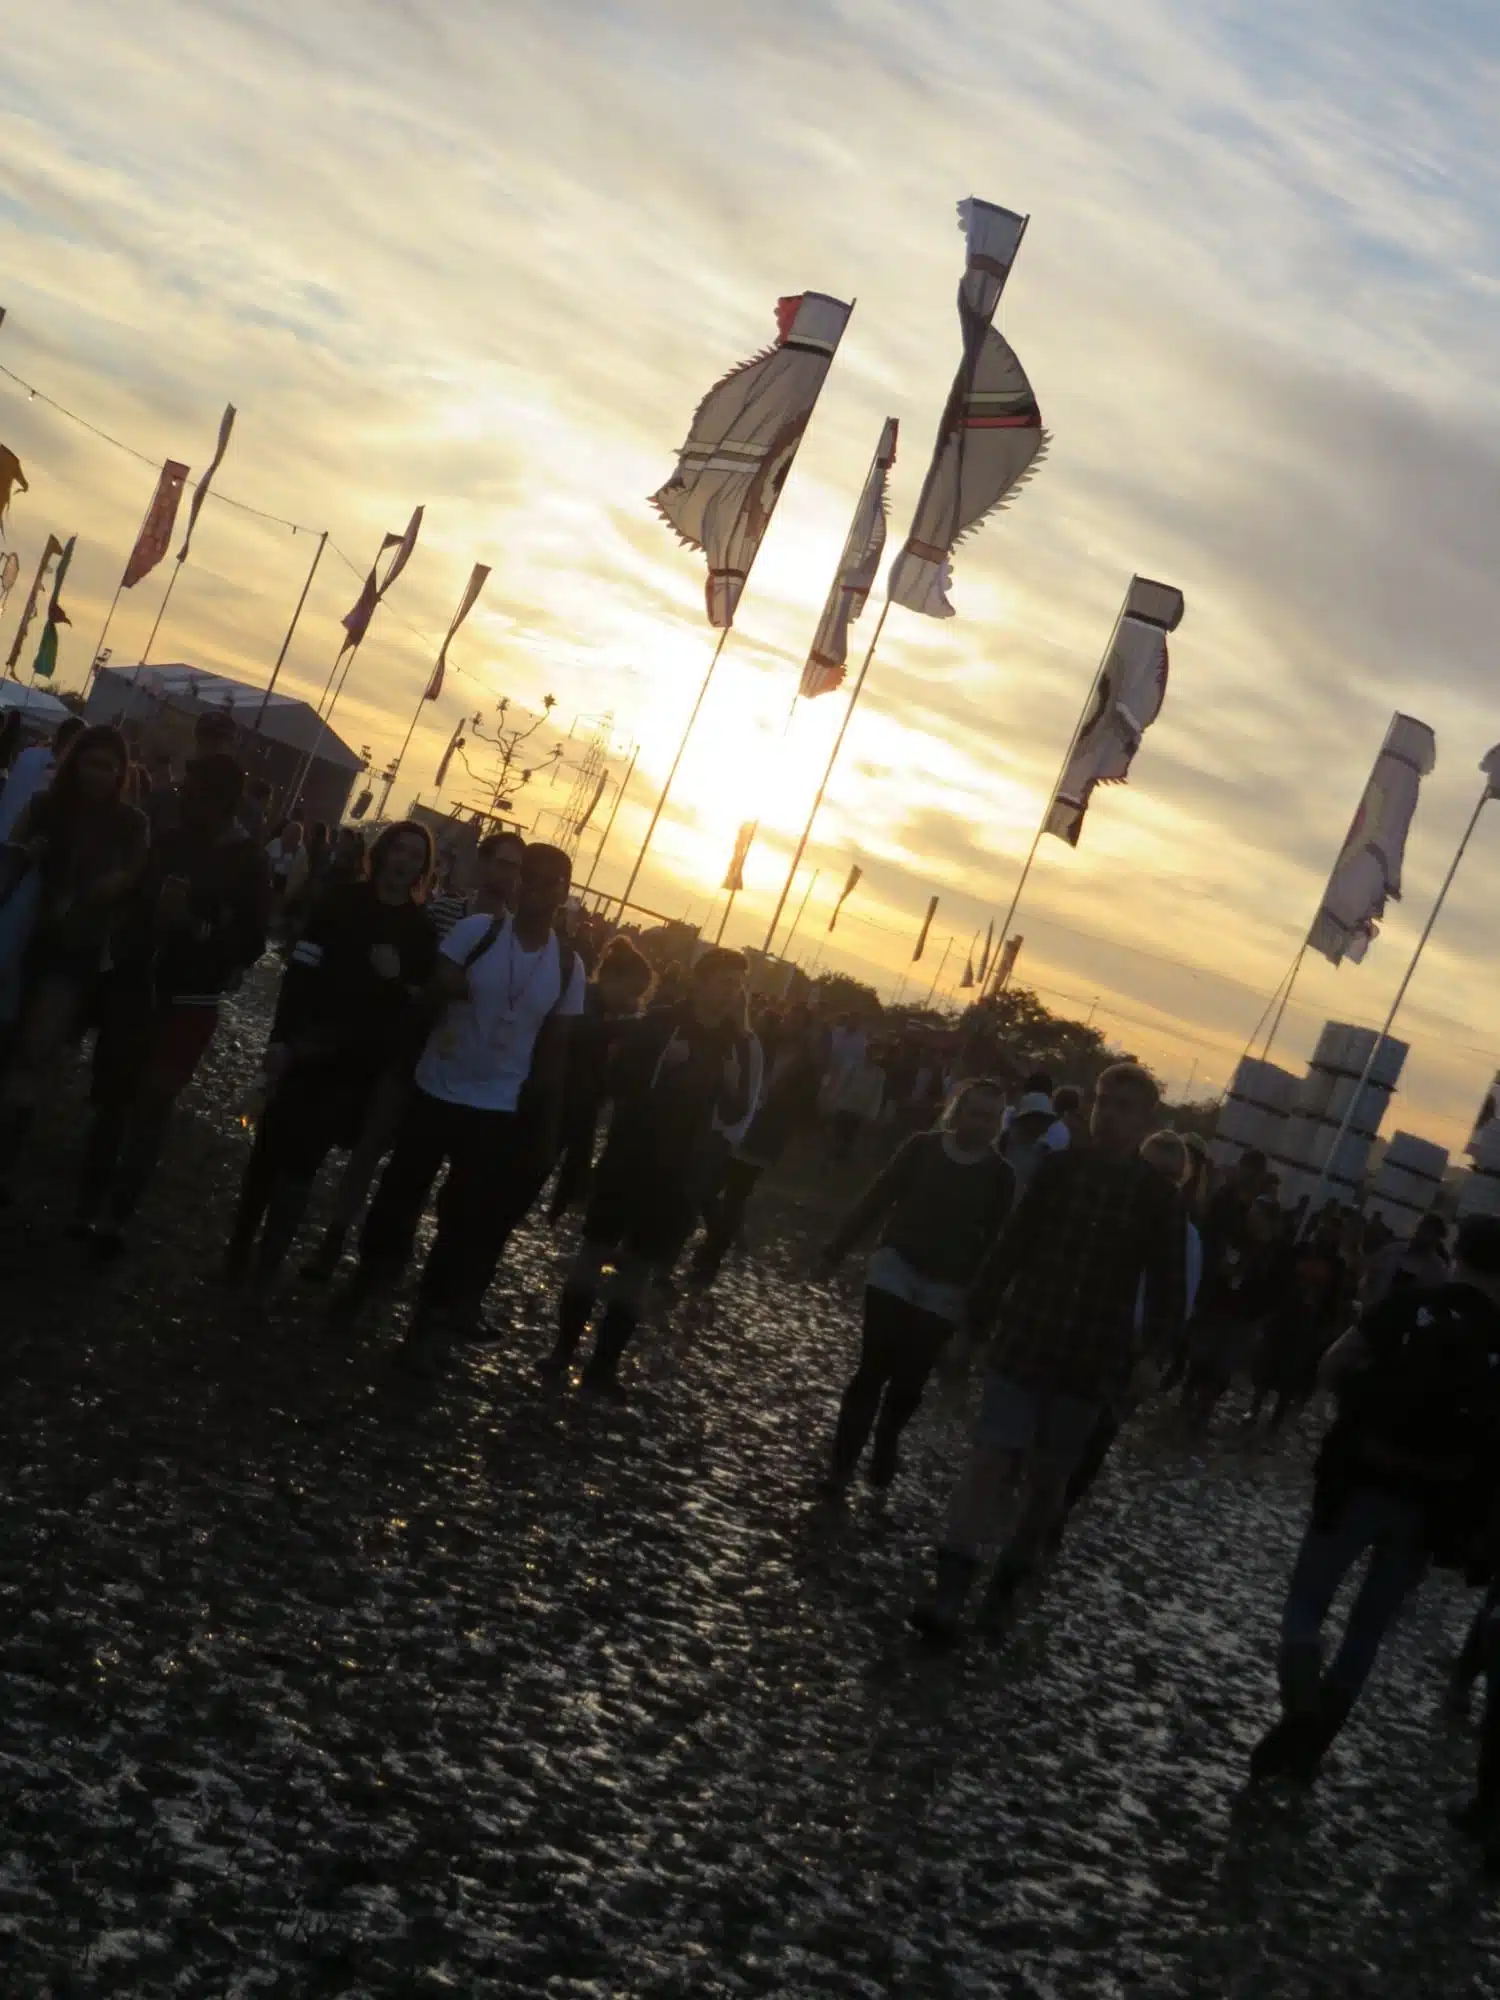 Sun shining at Glastonbury right after the rain. You have to pack for every kind of weather!